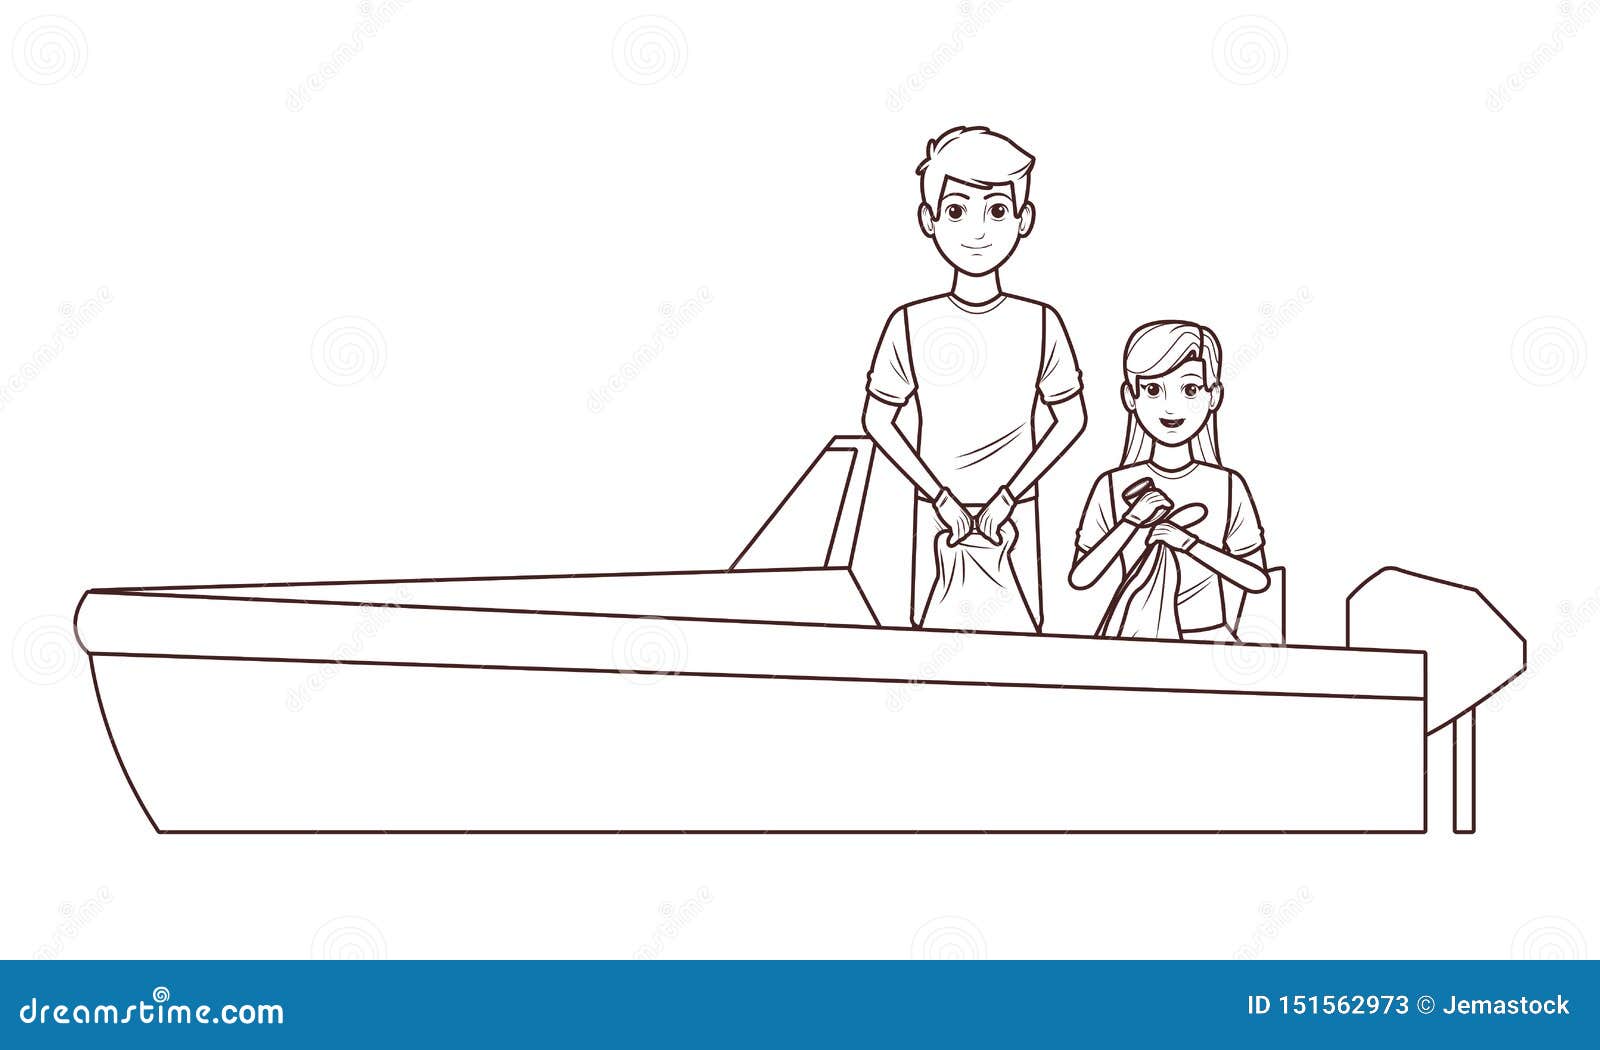 Boat boarding with two person in black and white. Boat boarding with two person with cleaning tools icon cartoon in black and white vector illustration graphic design